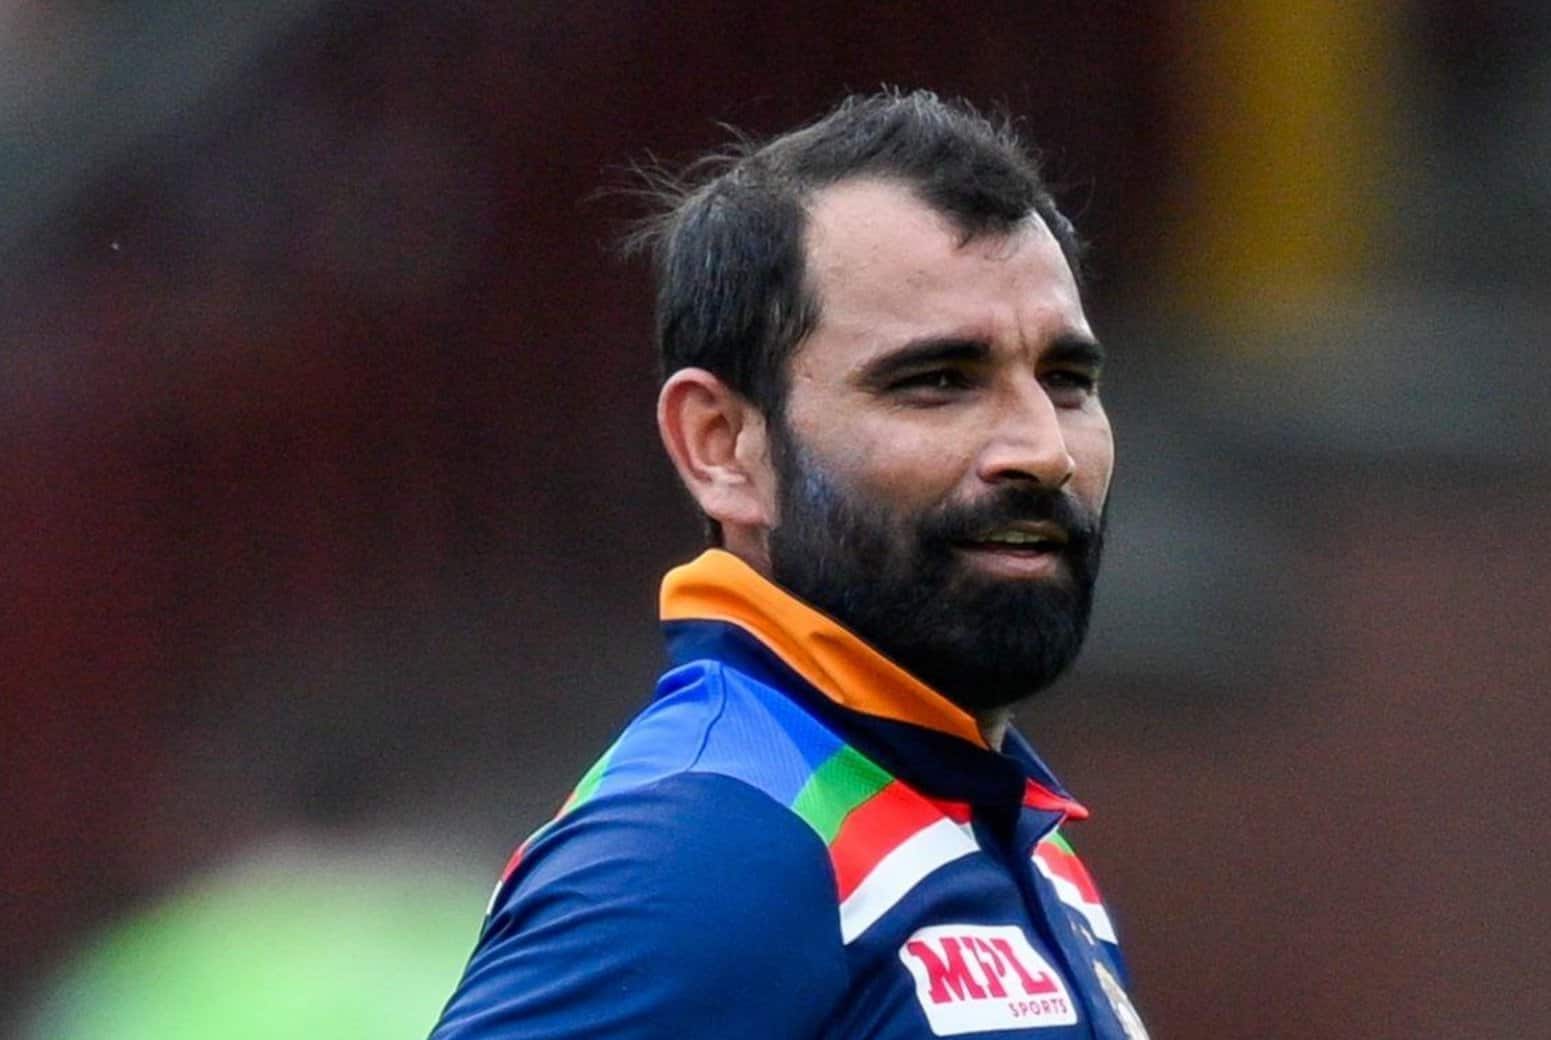 Mohammad Shami optimistic after injury rules him out of Bangladesh tour